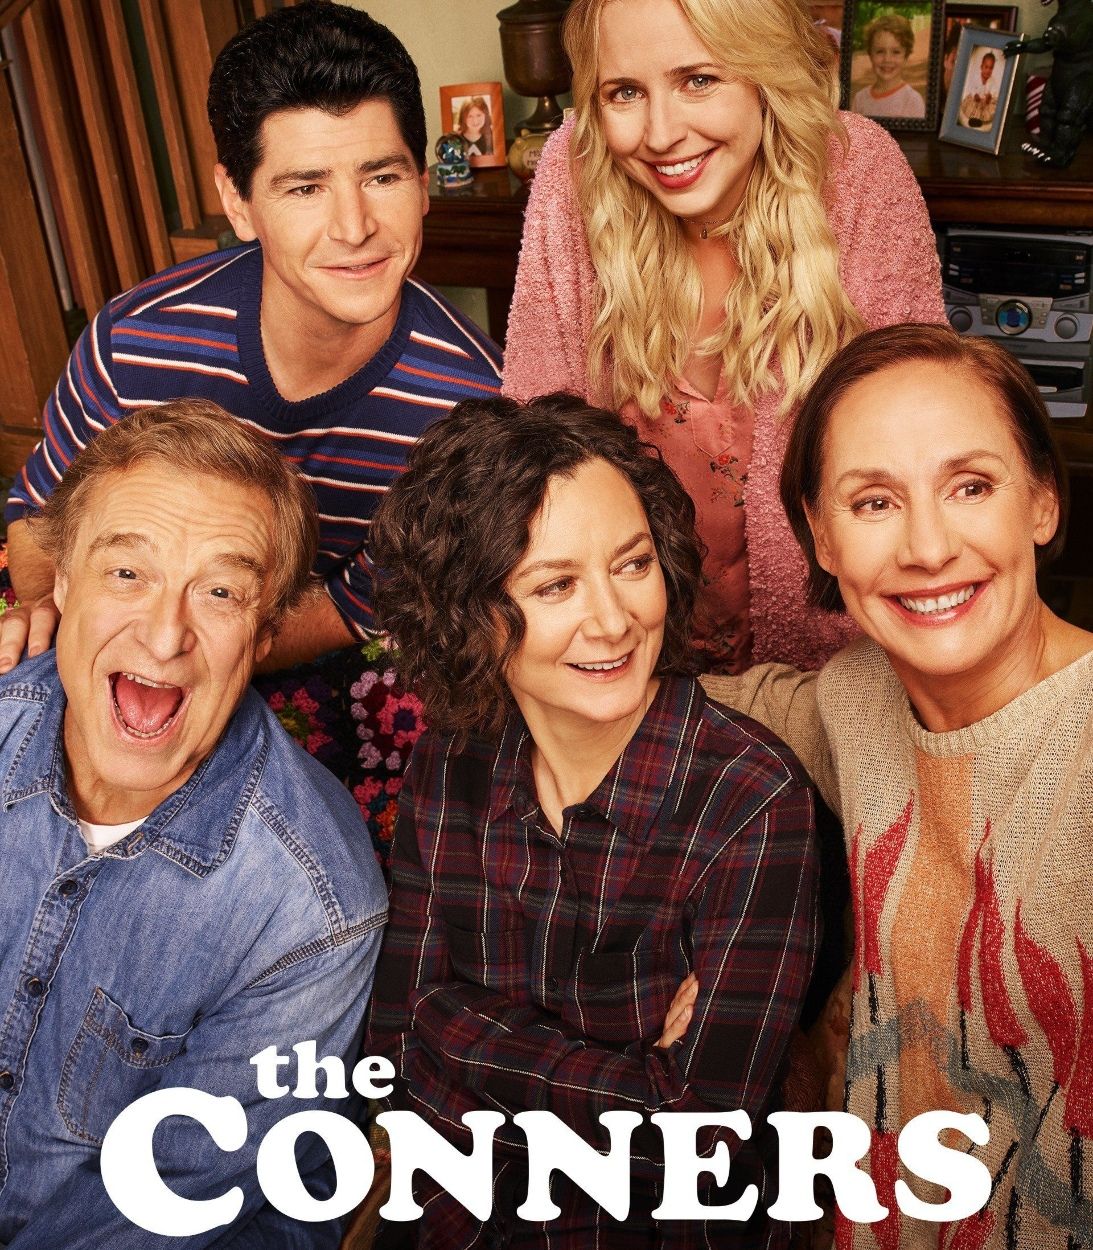 the conners poster TLDR vertical